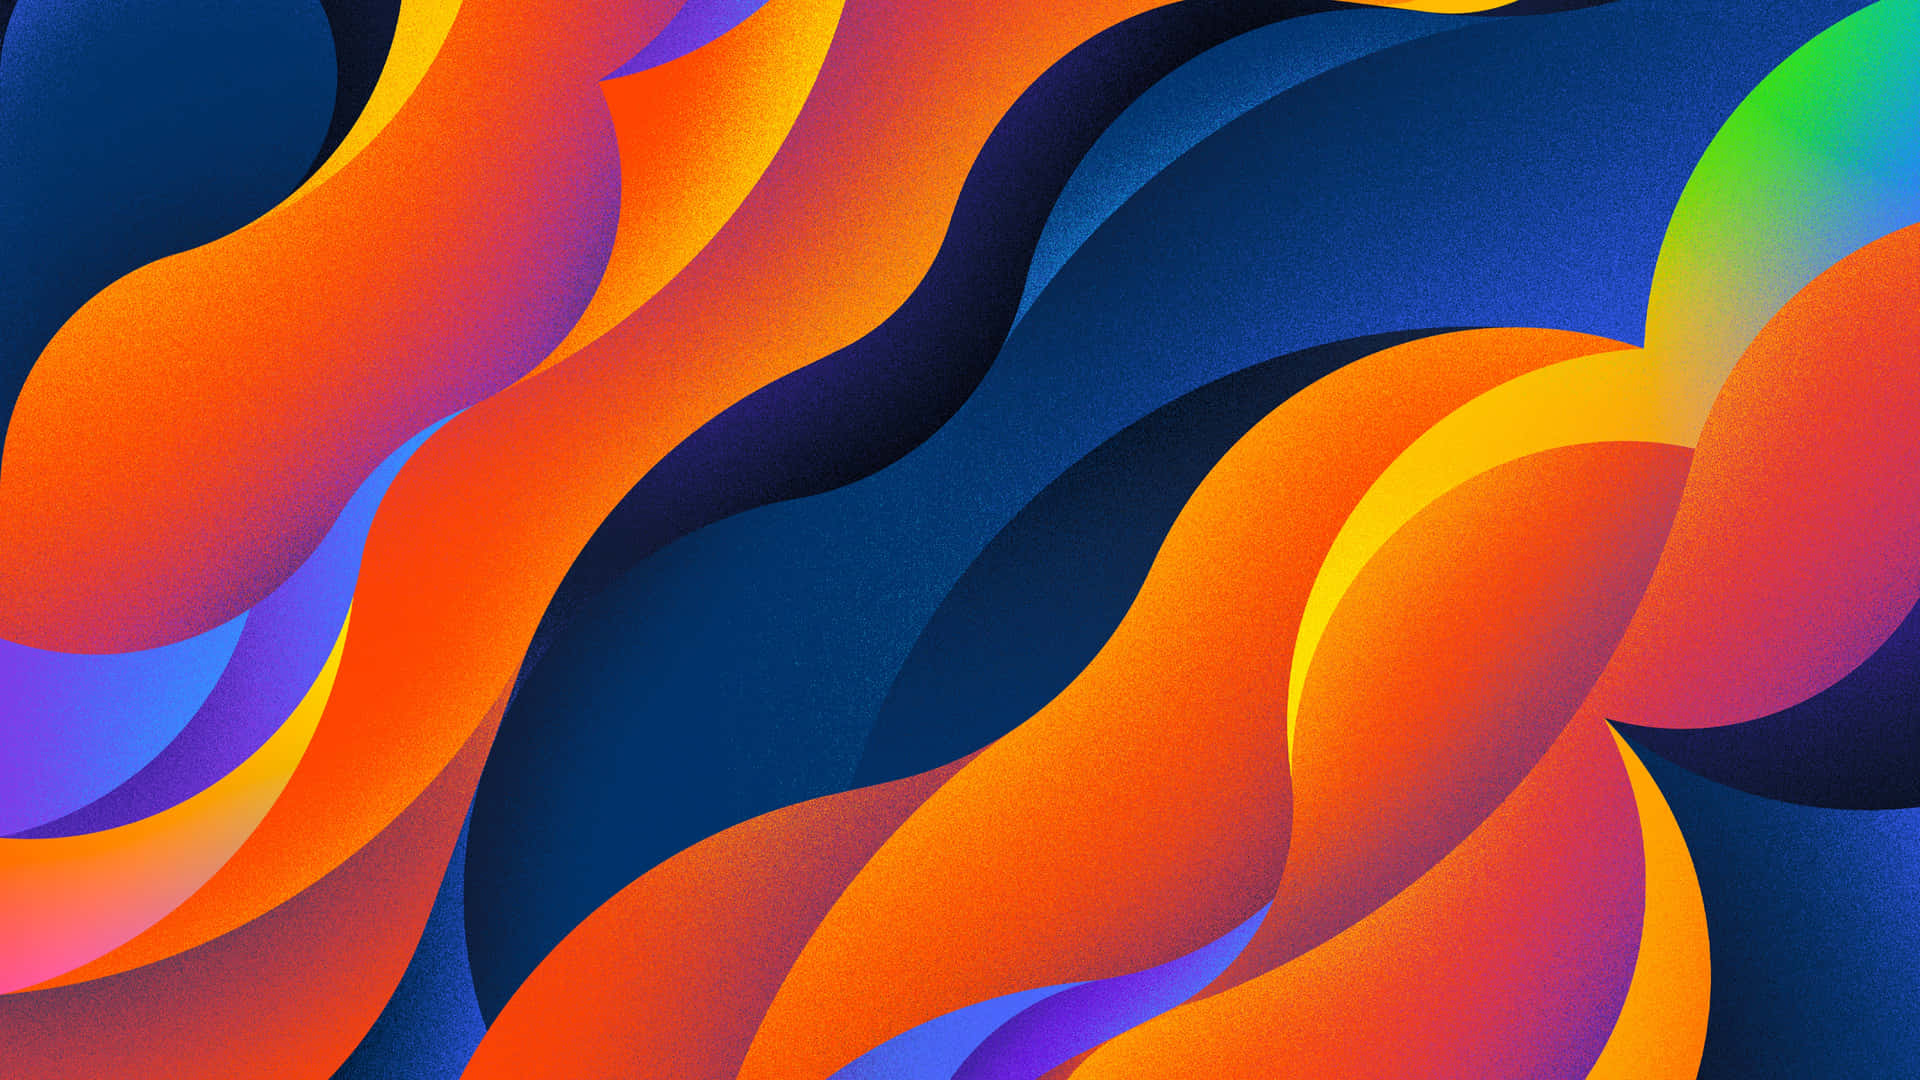 "an Explosion Of Colorful Abstract Art" Wallpaper